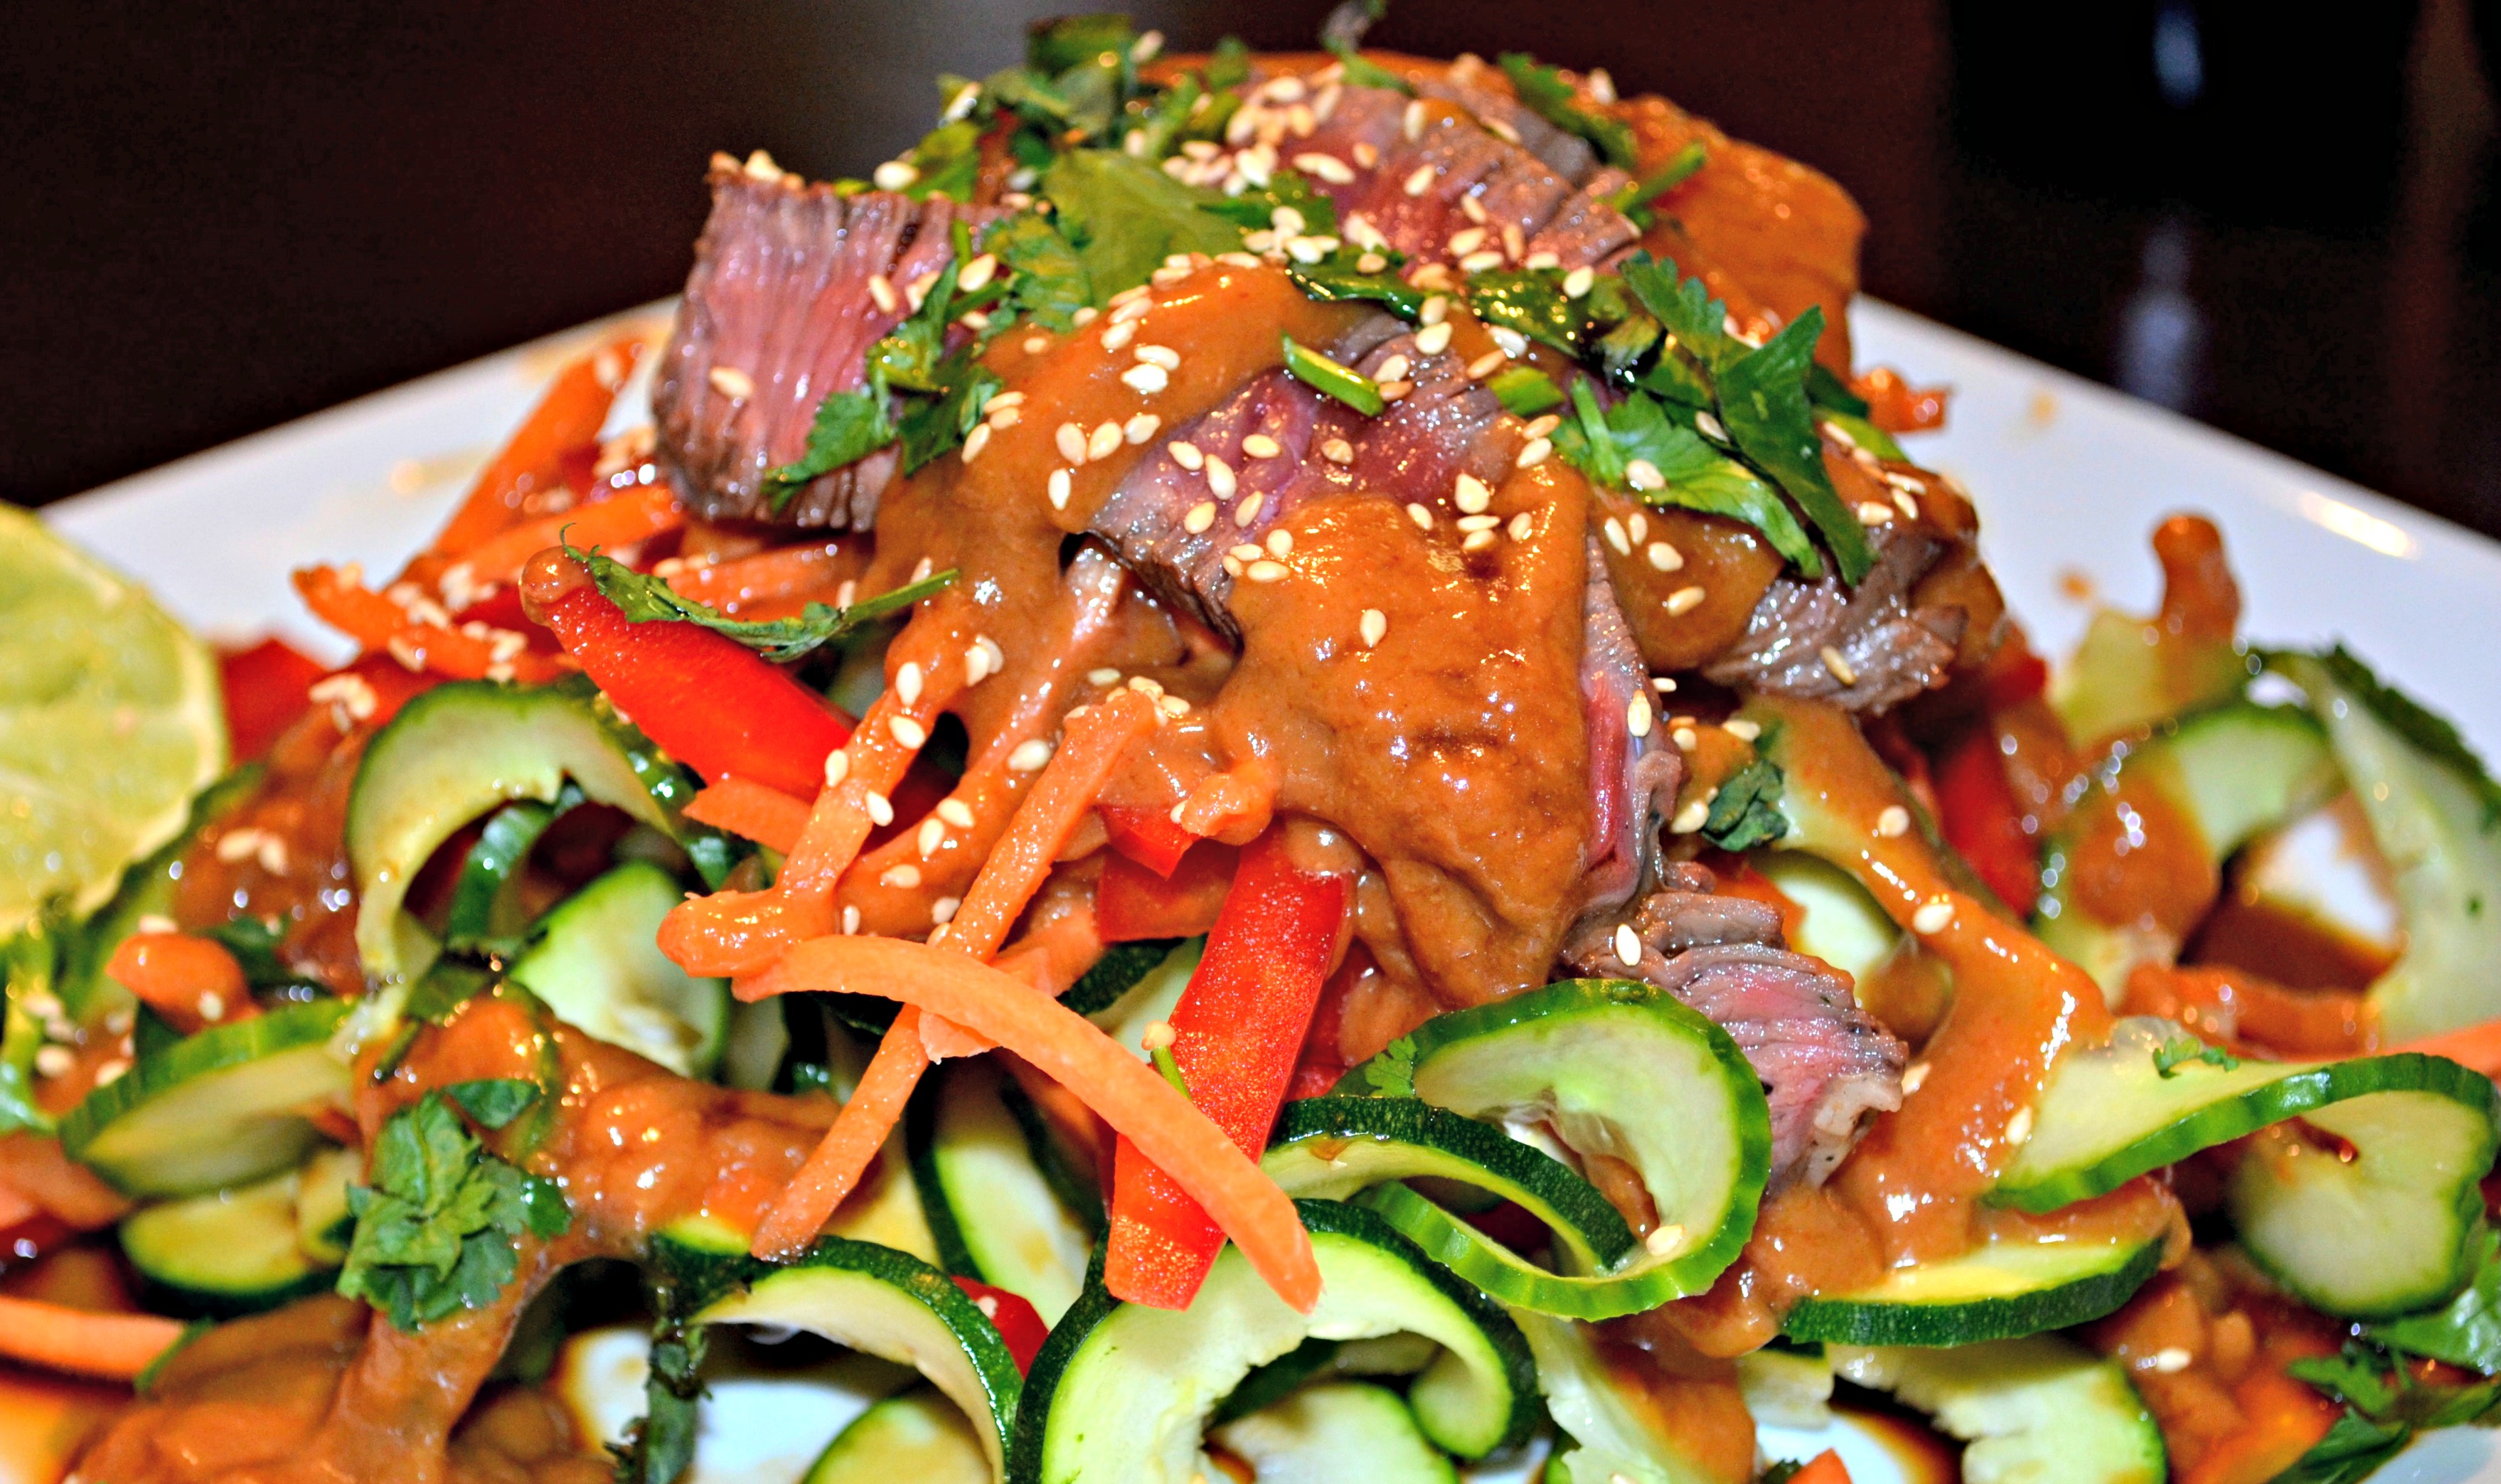 Raw Asian Vegetable Salad with Grilled Marinated Steak